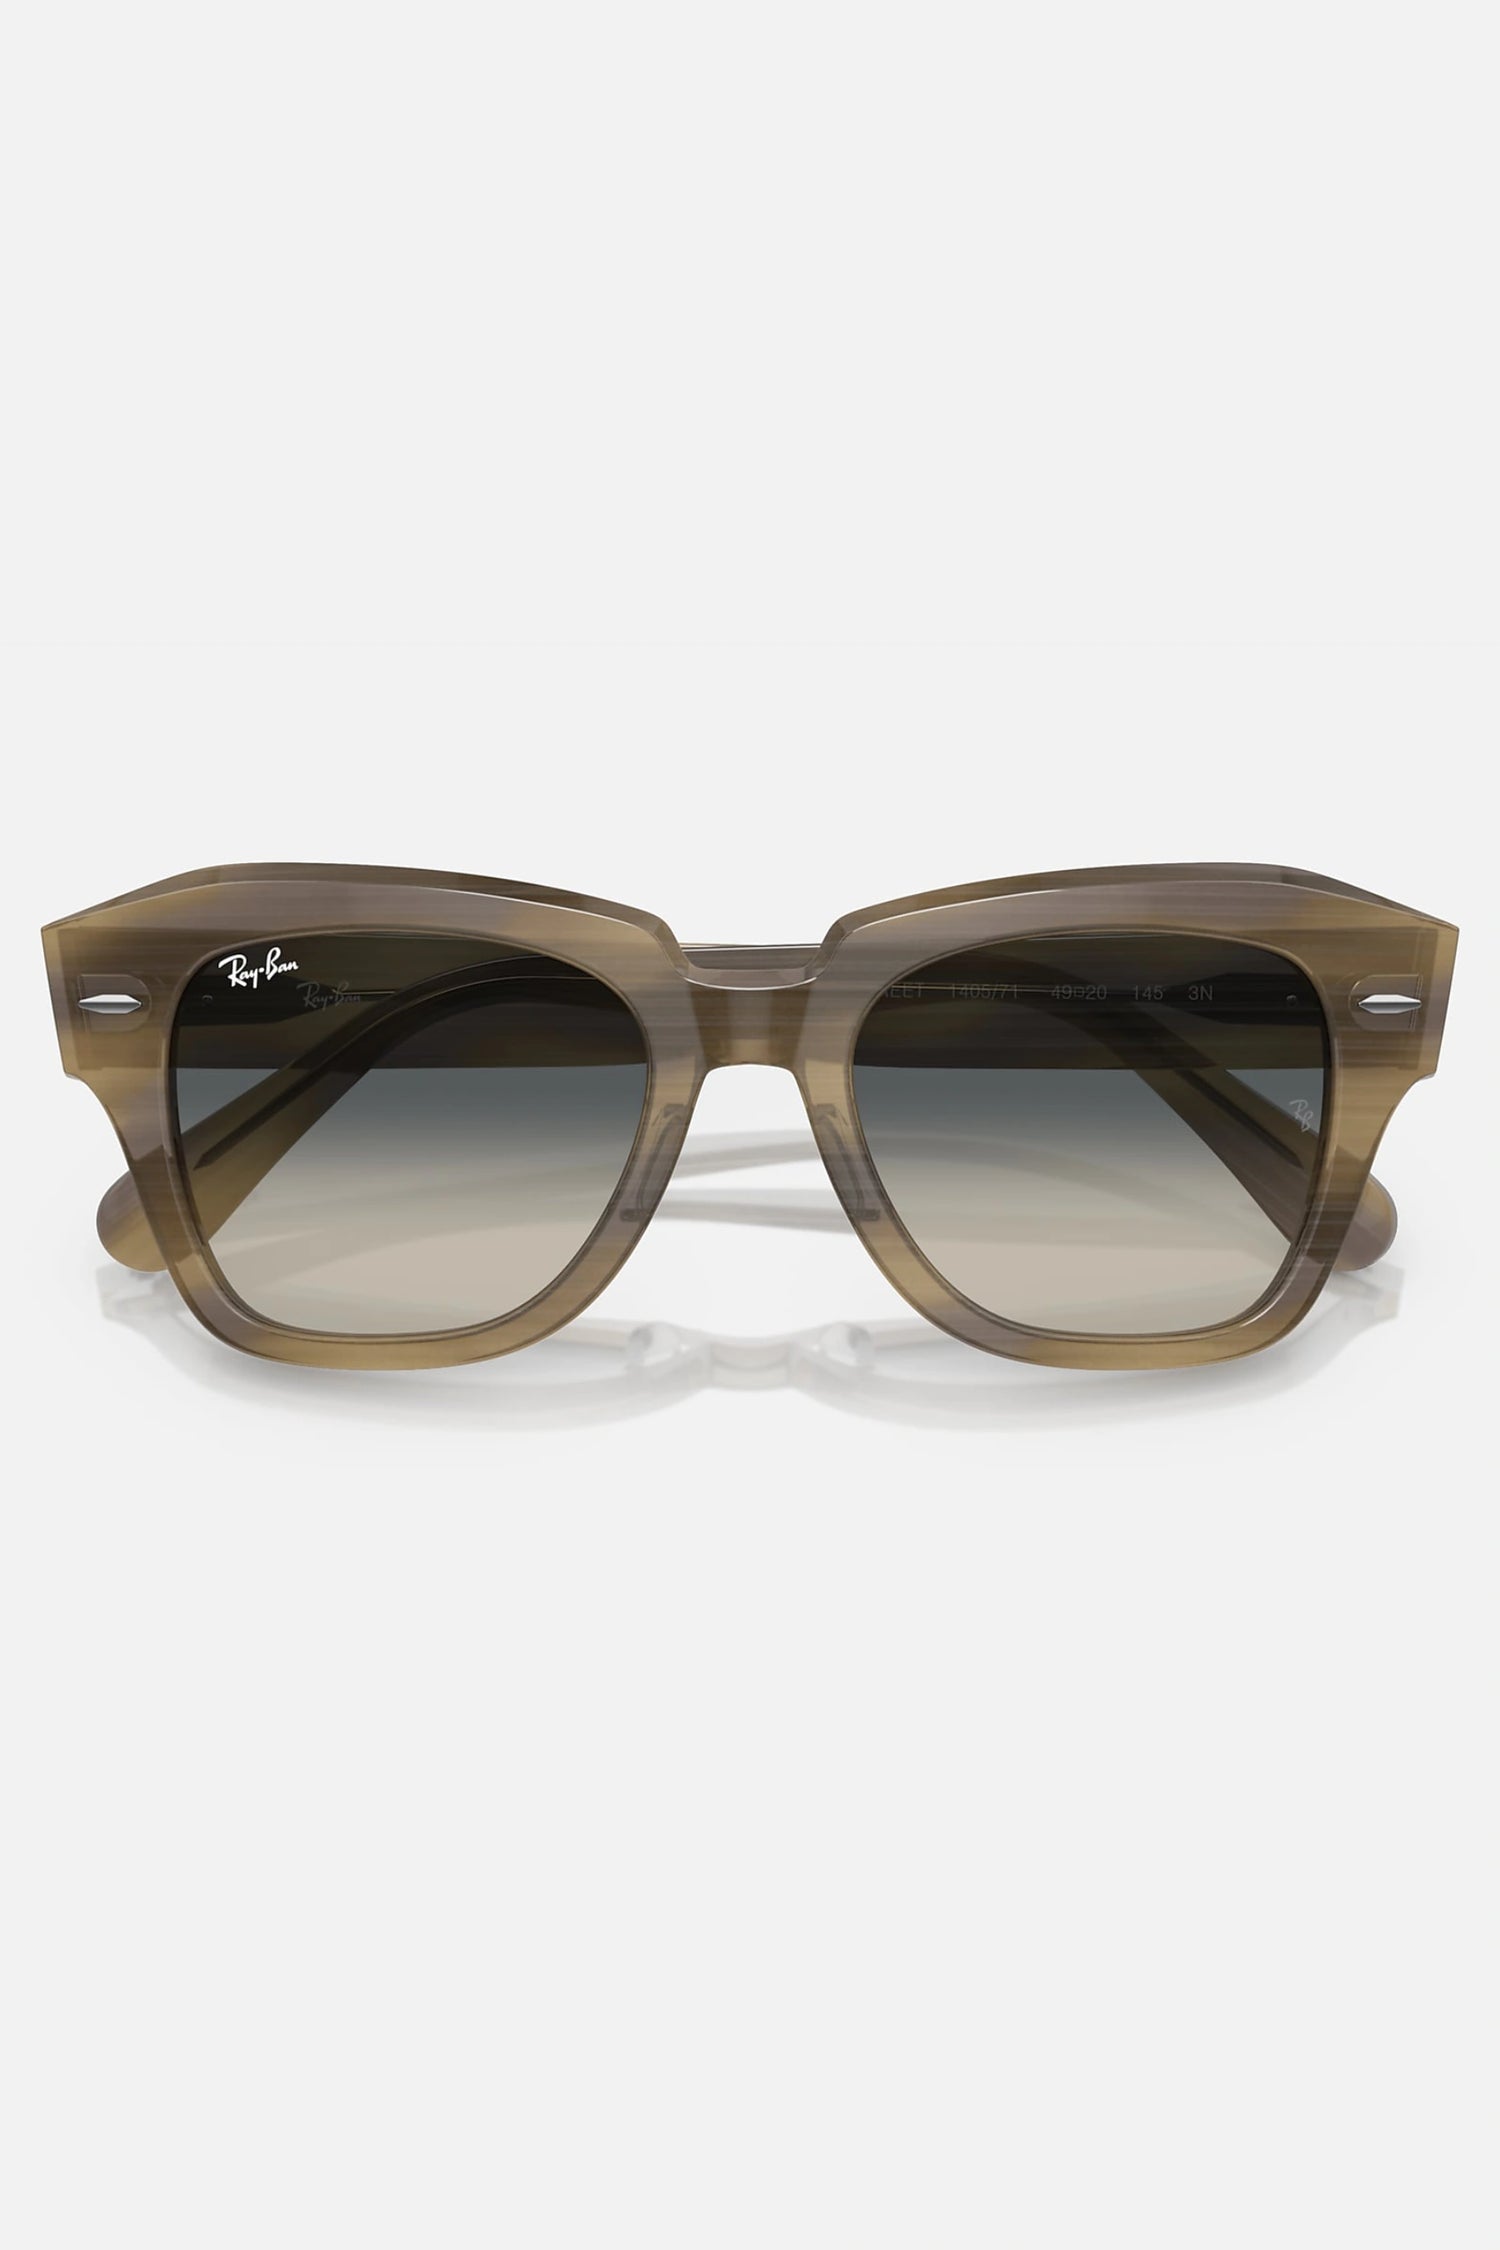 Ray-Ban RB2186 140571 State Street